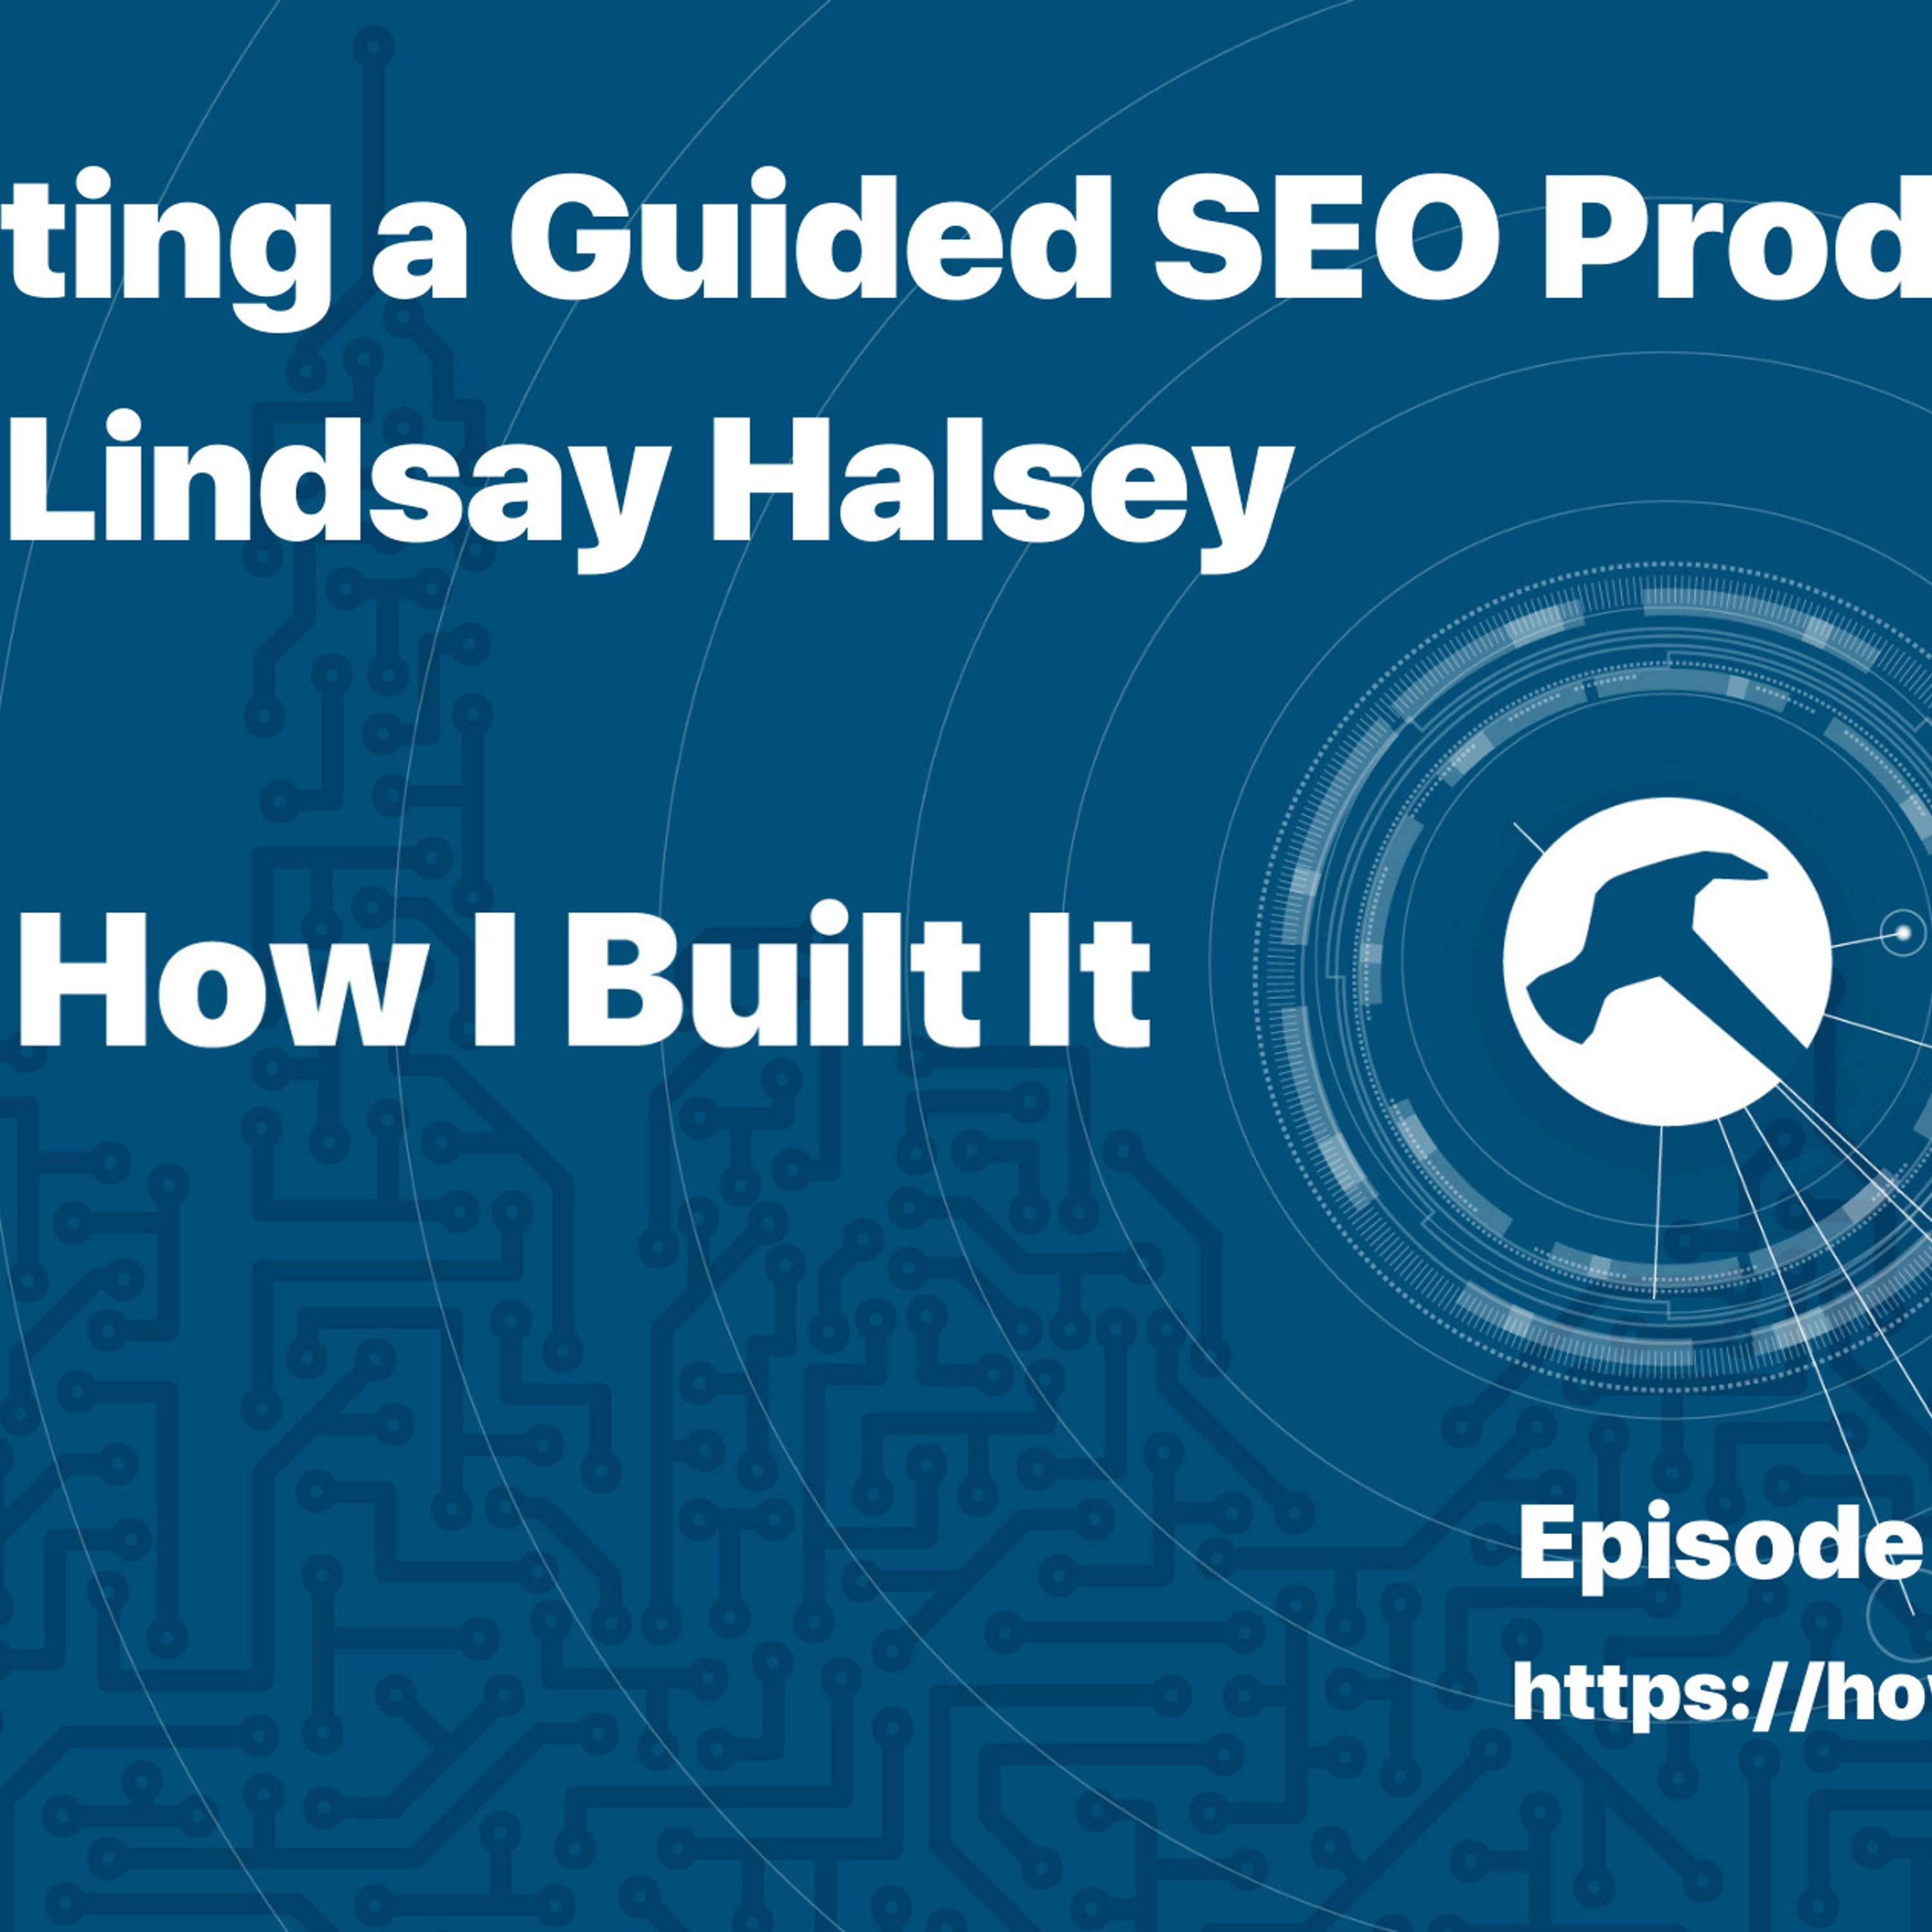 Creating a Guided SEO Product with Lindsay Halsey